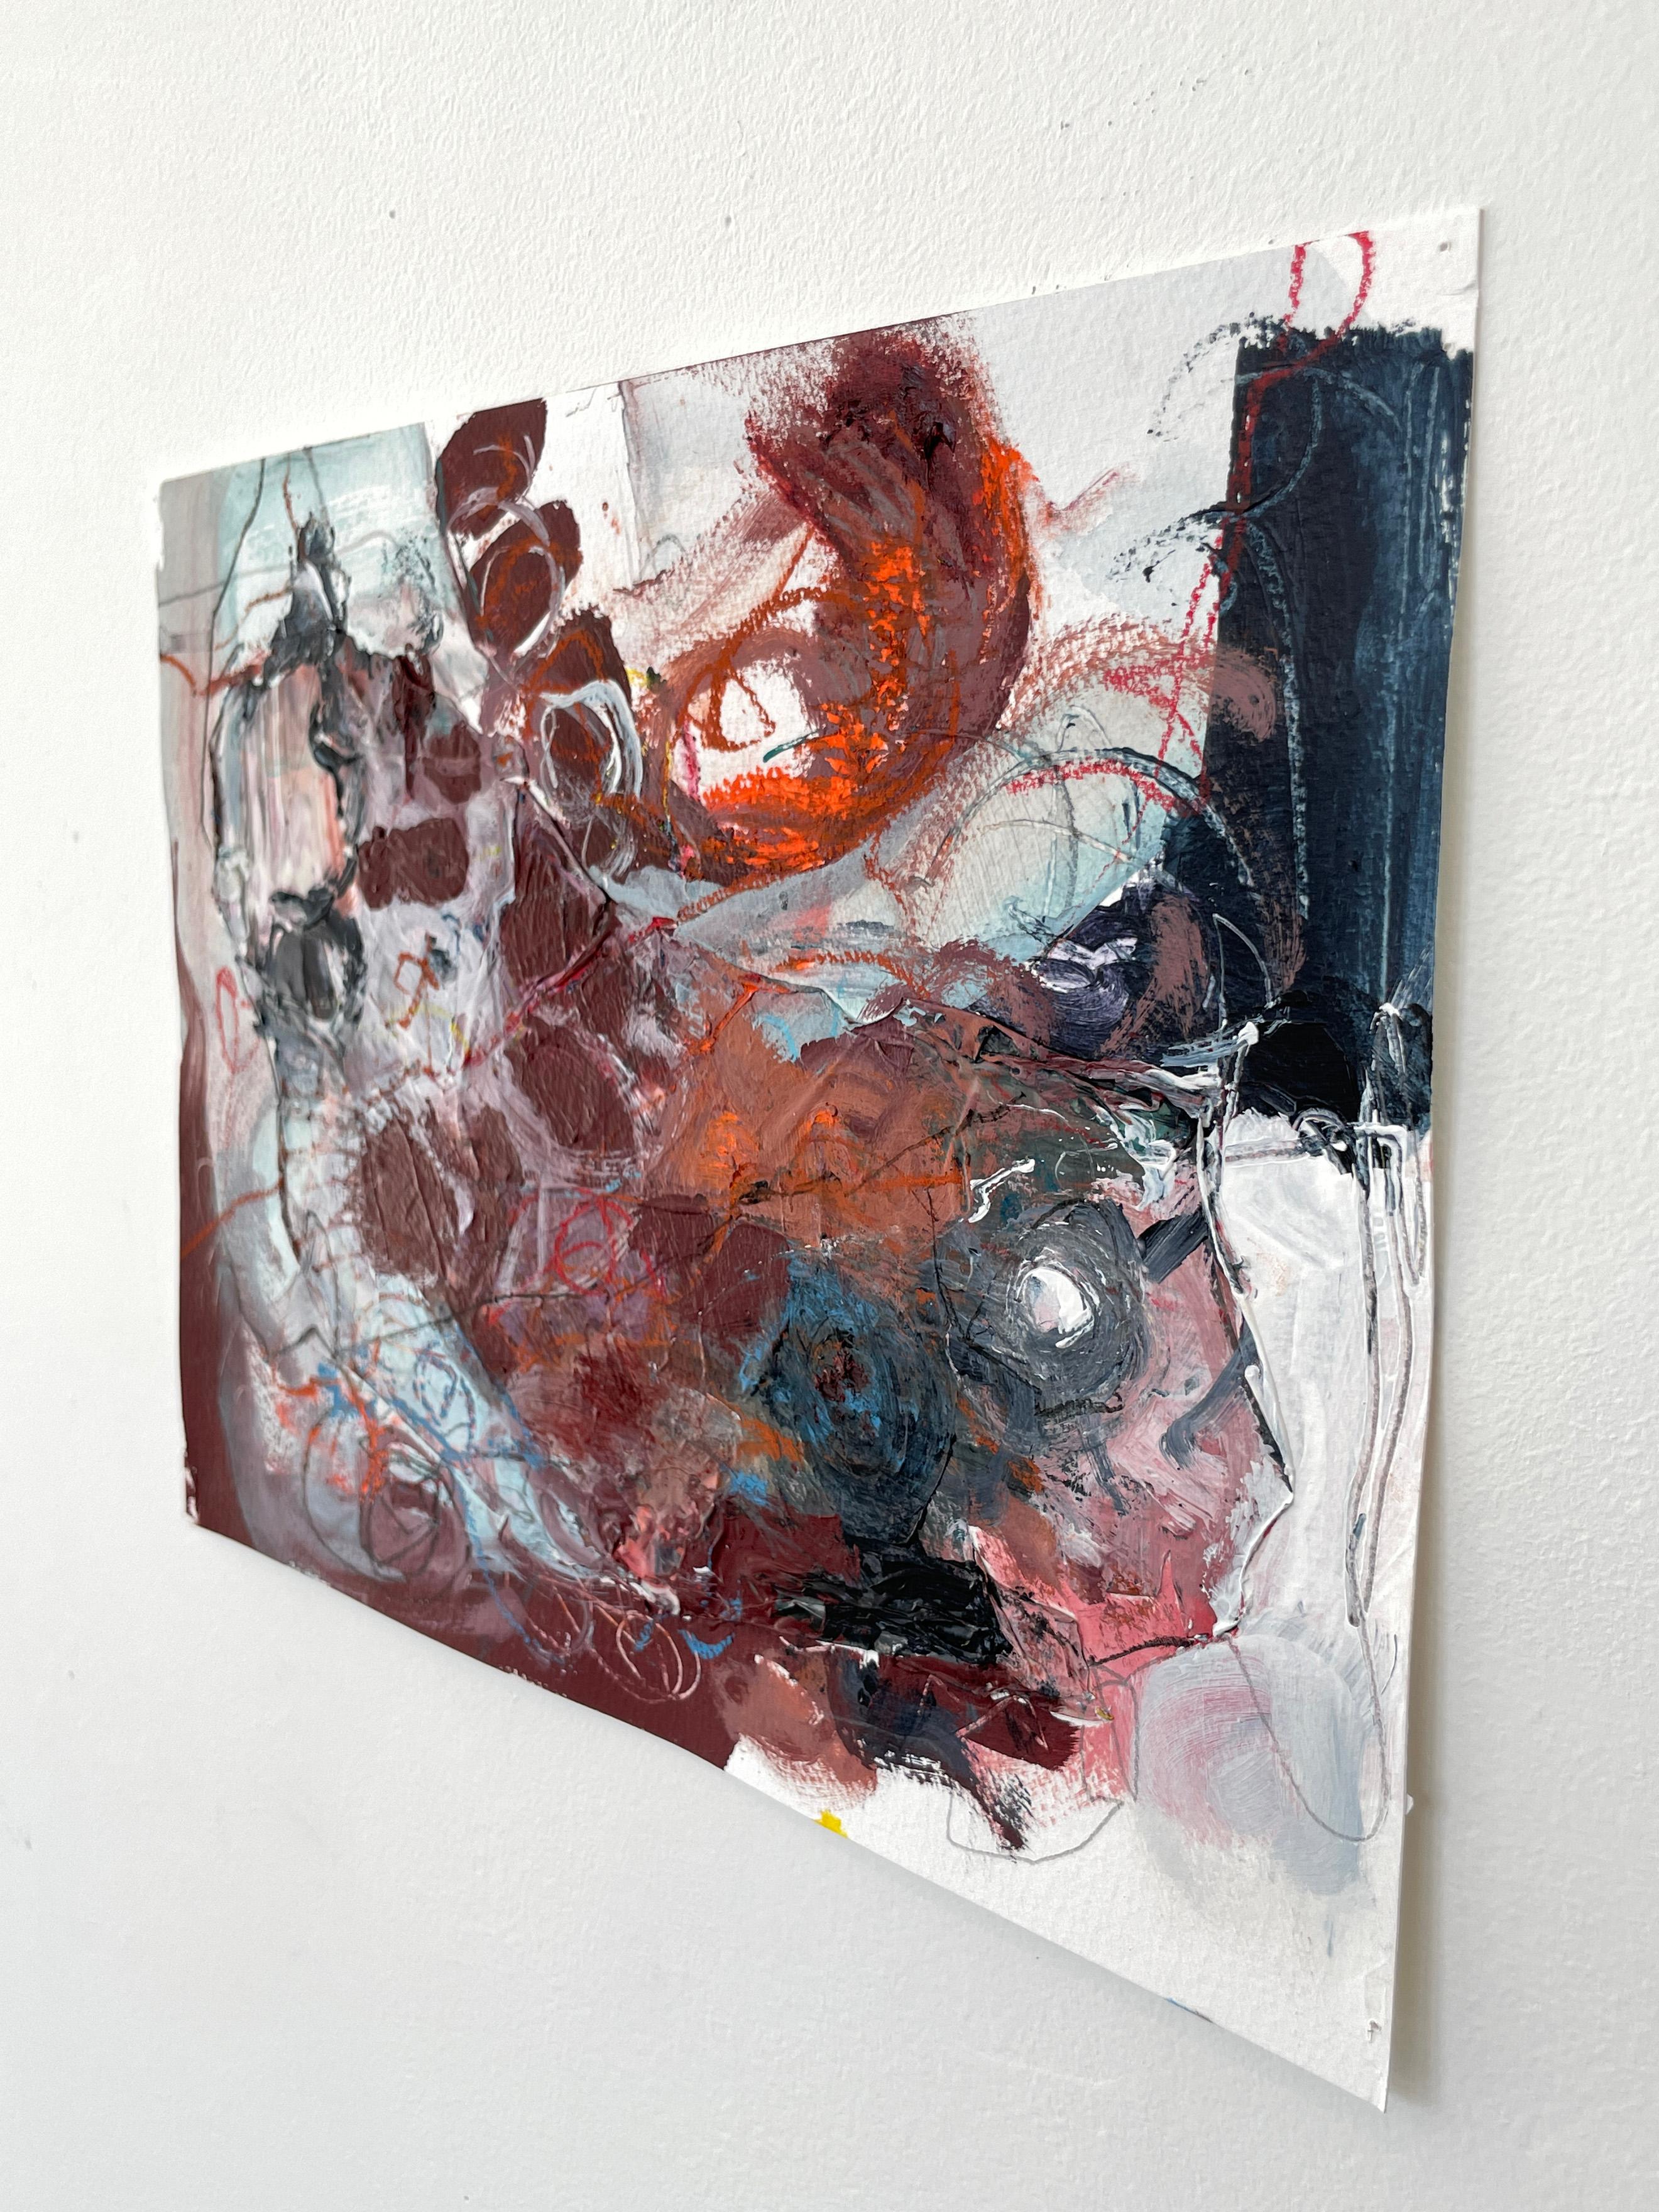 Small Works on Paper, Untitled #15 - Abstract Painting by Stephanie Visser 